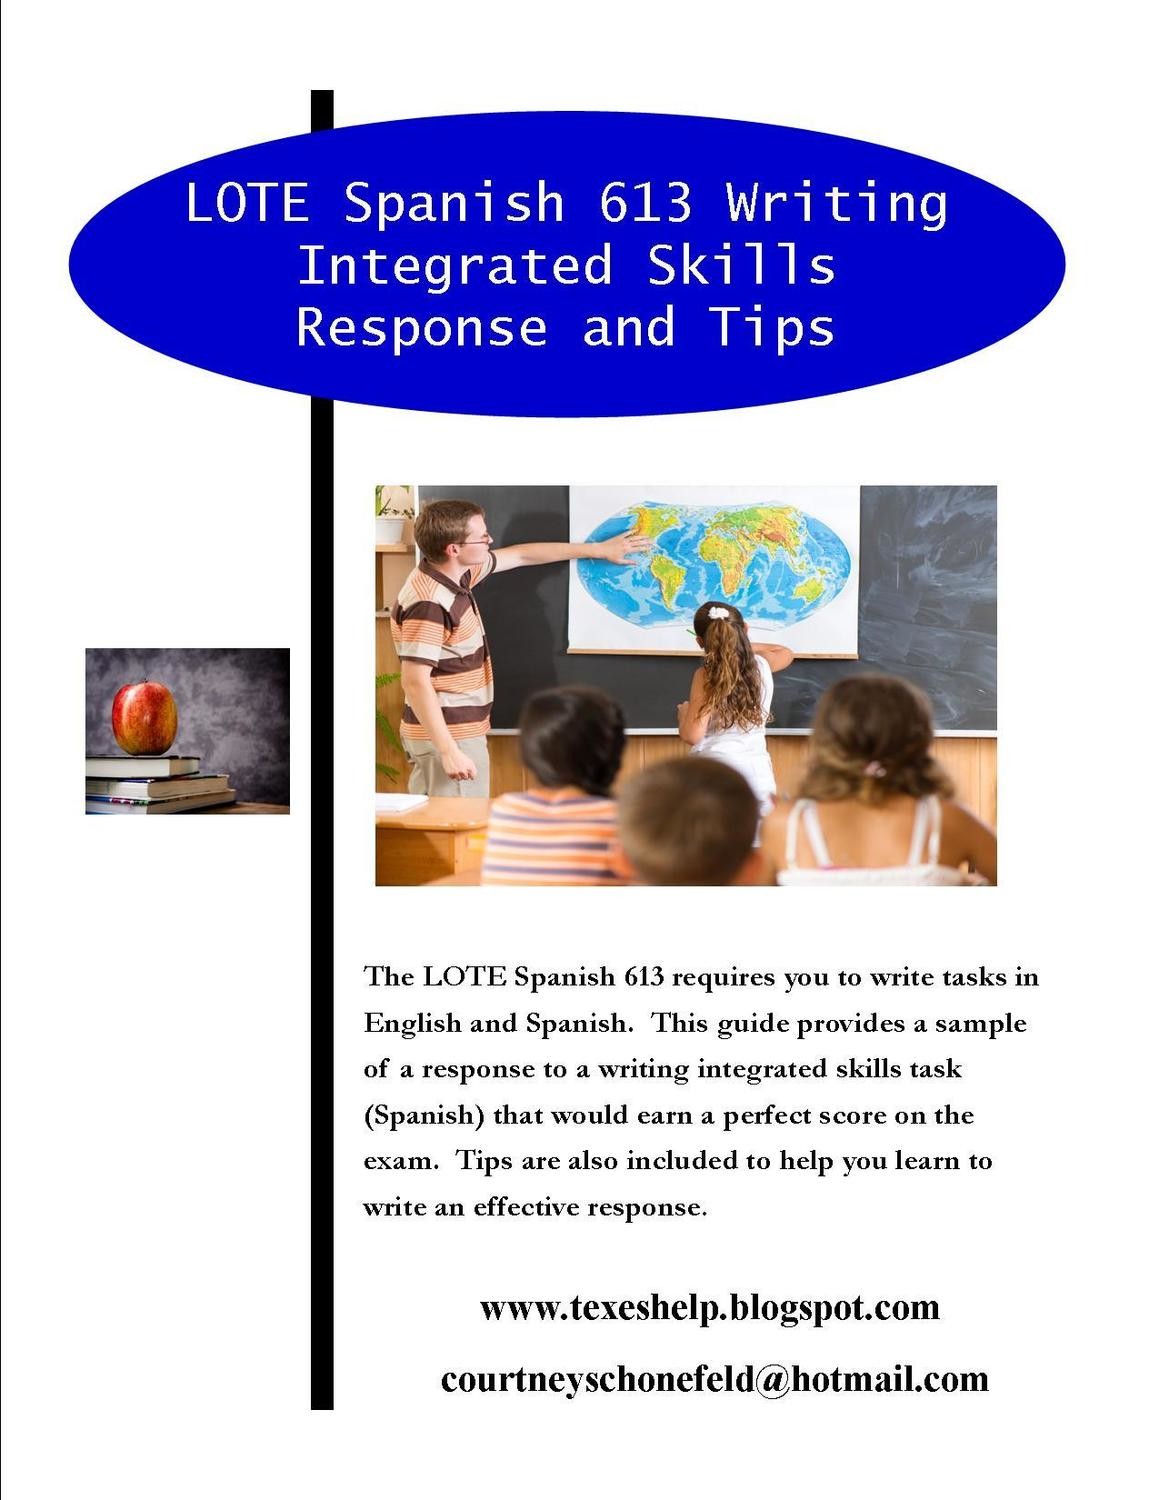 LOTE Spanish 613 Writing Integrated Skills Response and Tips